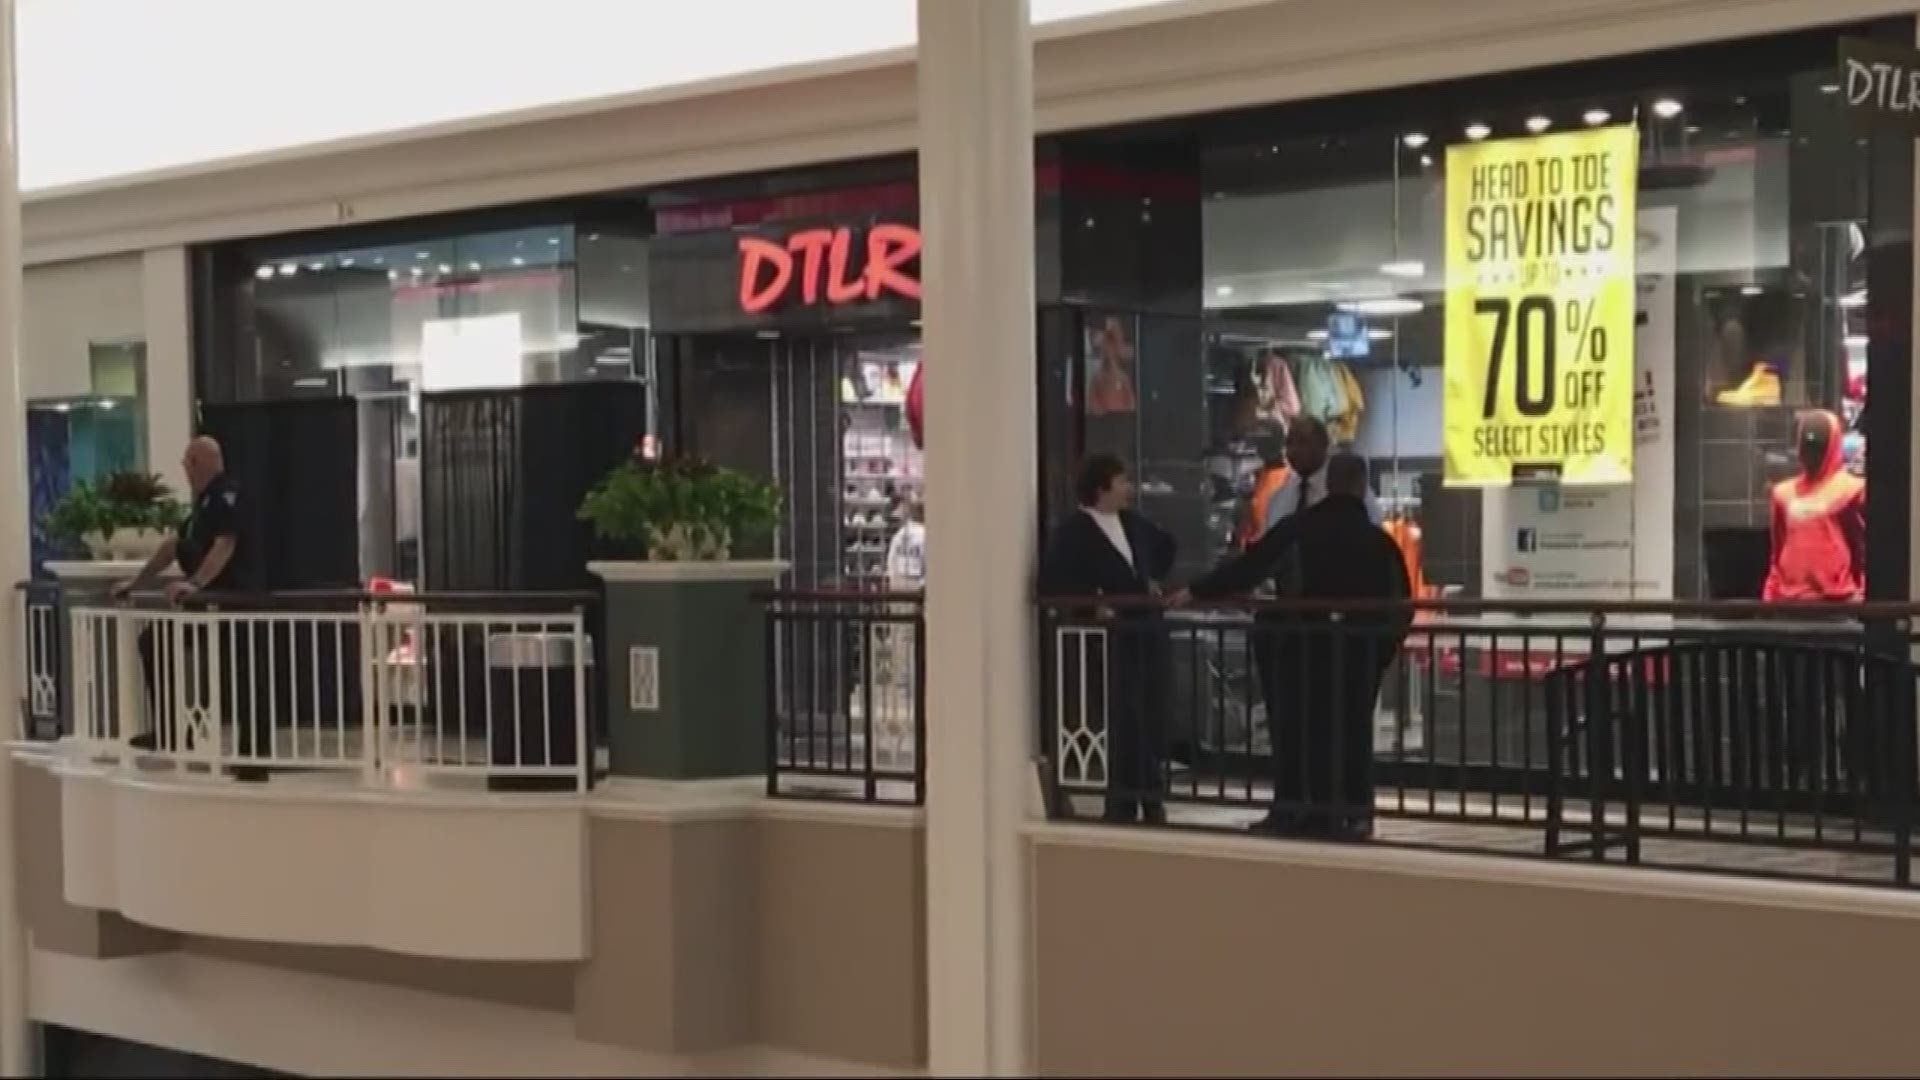 A 24-year-old was killed Sunday during a confrontation in a local mall. Monday, an employee was killed in a Charlotte store.